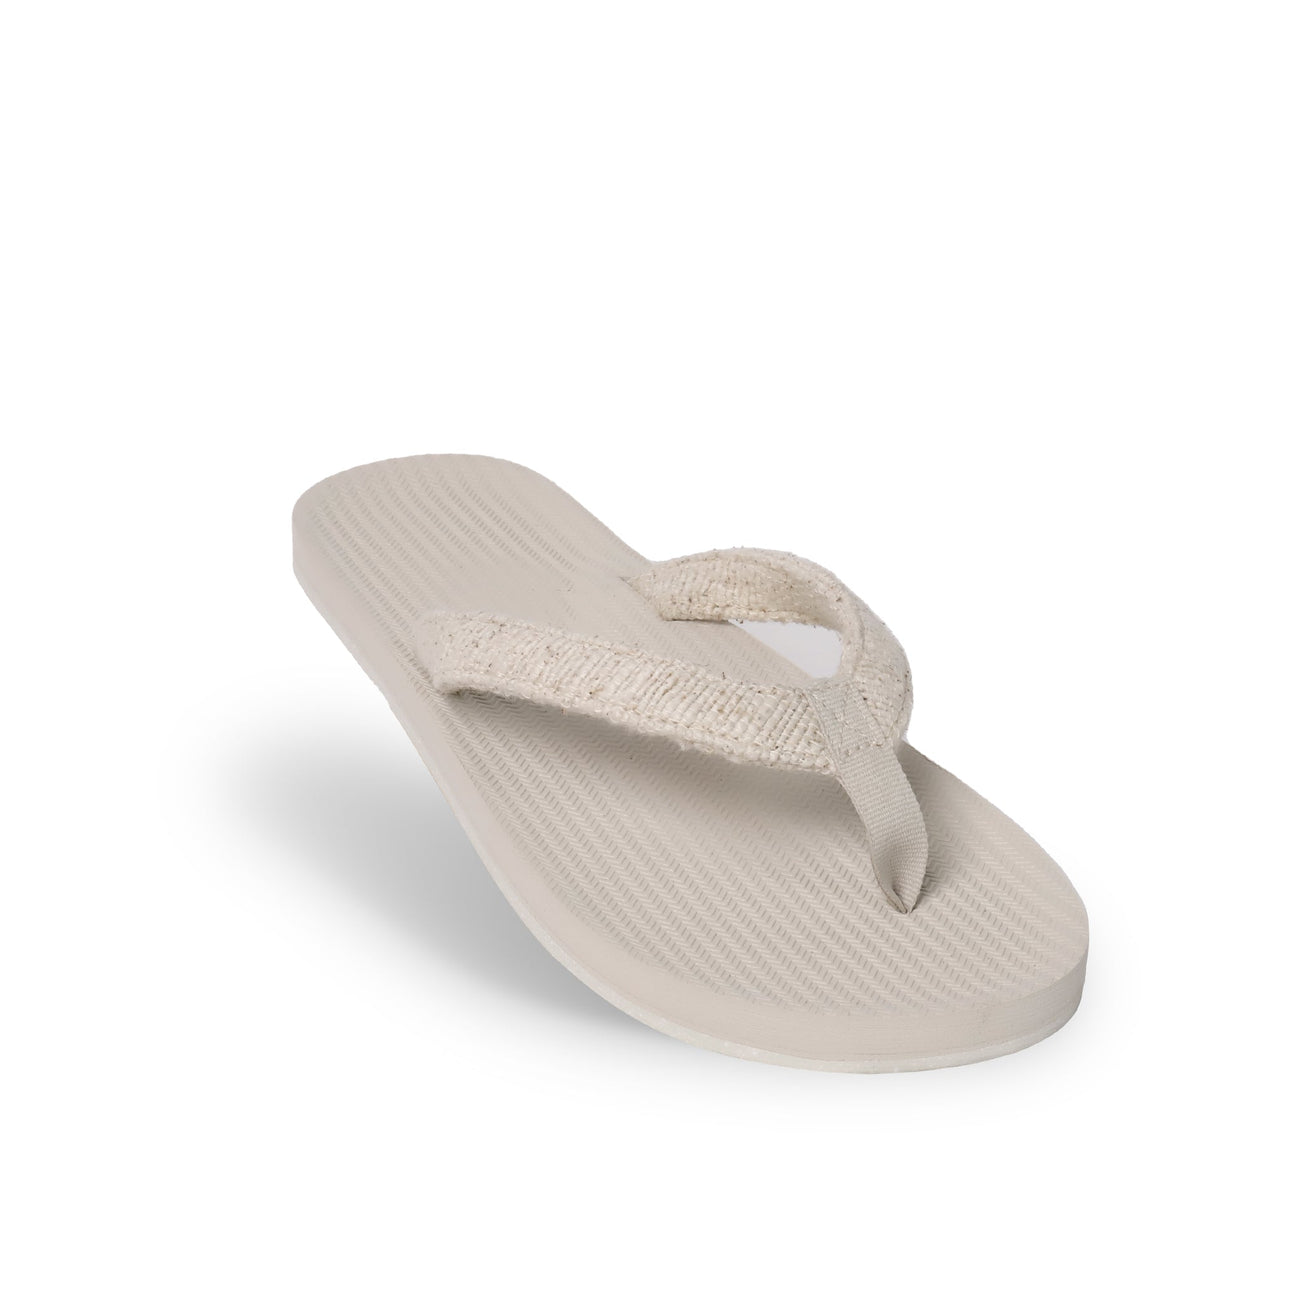 Indosole - Women's Recycled Pable Flip Flops - eco friendly footwear - all things being eco chilliwack canada - made from recycled textiles - fair trade and ethical shoes